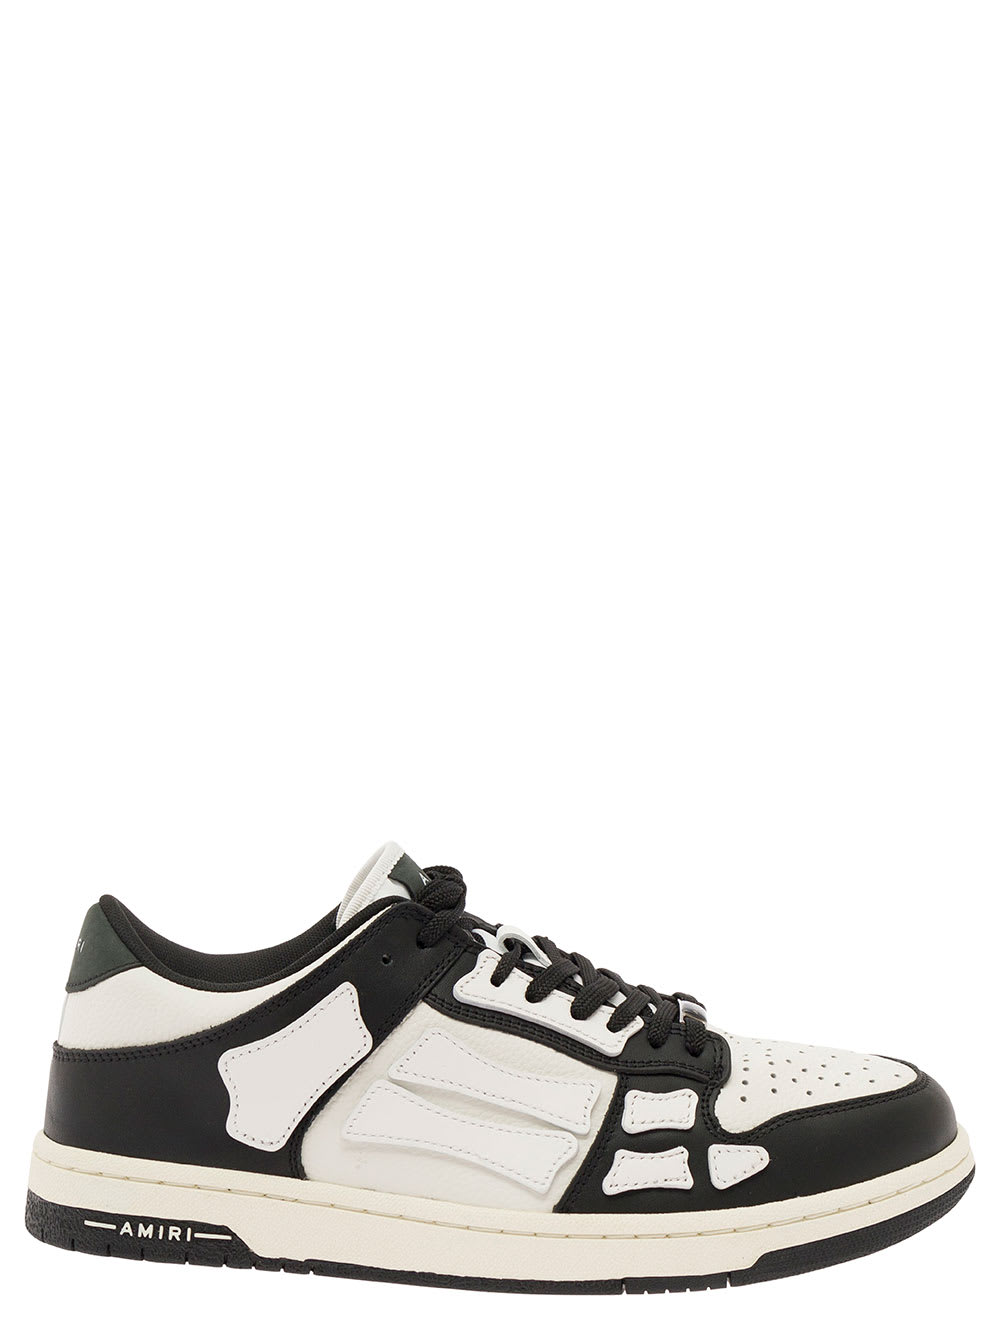 Shop Amiri Skel Top Low White And Black Sneakers With Skeleton Patch In Leather Man